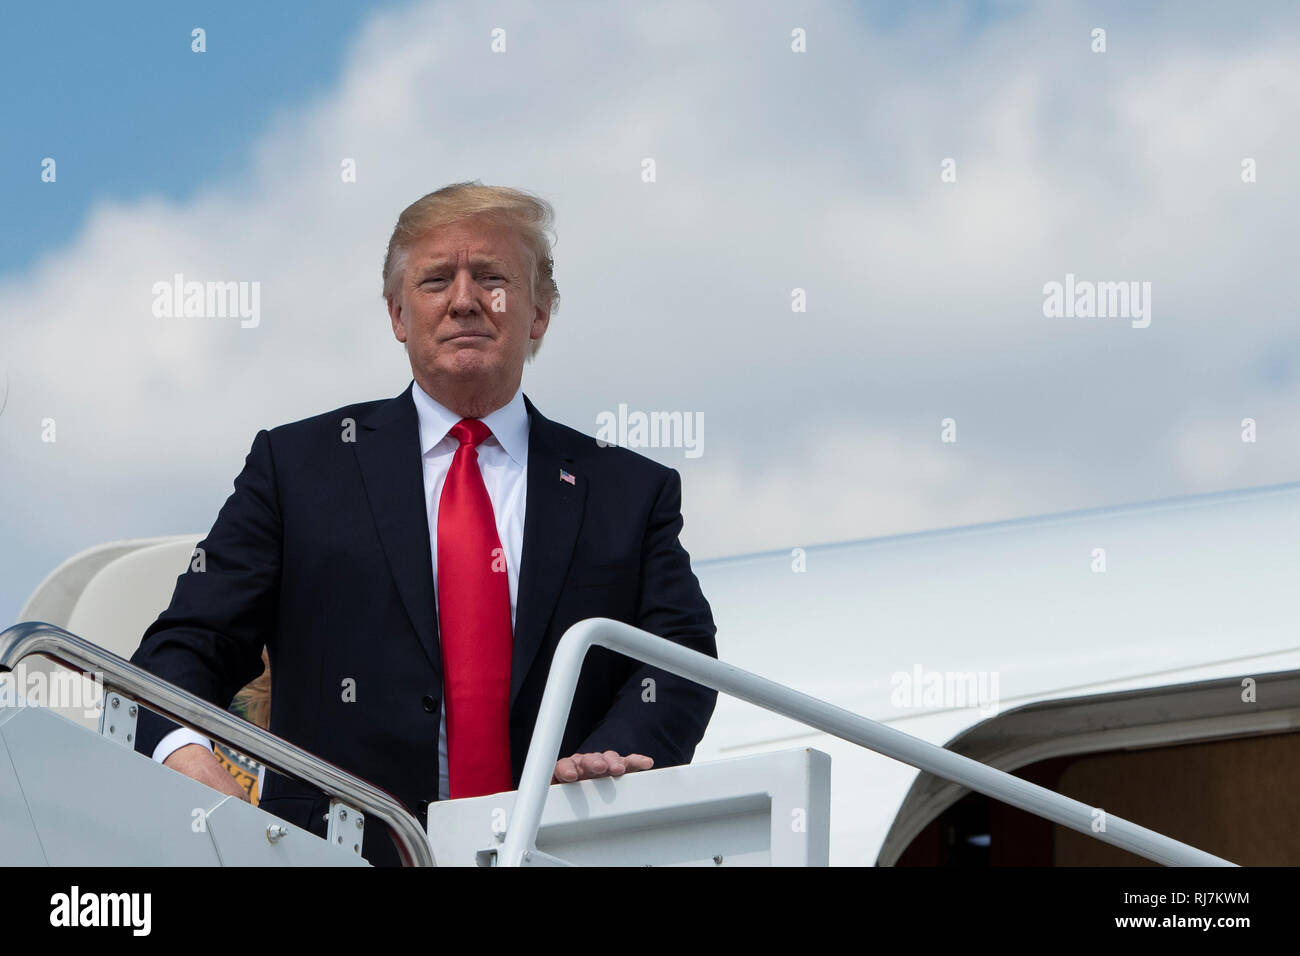 President of the United States Donald J. Trump, pauses at the top of the steps before boarding Air Force One at Joint Base Andrews, Md., June 29, 2018. The 89 AW provides global Special Air Mission airlift, logistics, aerial port and communications for the president, vice president, cabinet members, combatant commanders and other senior military and elected leaders. (U.S. Air Force photo/Tech. Sgt. Robert Cloys) Stock Photo